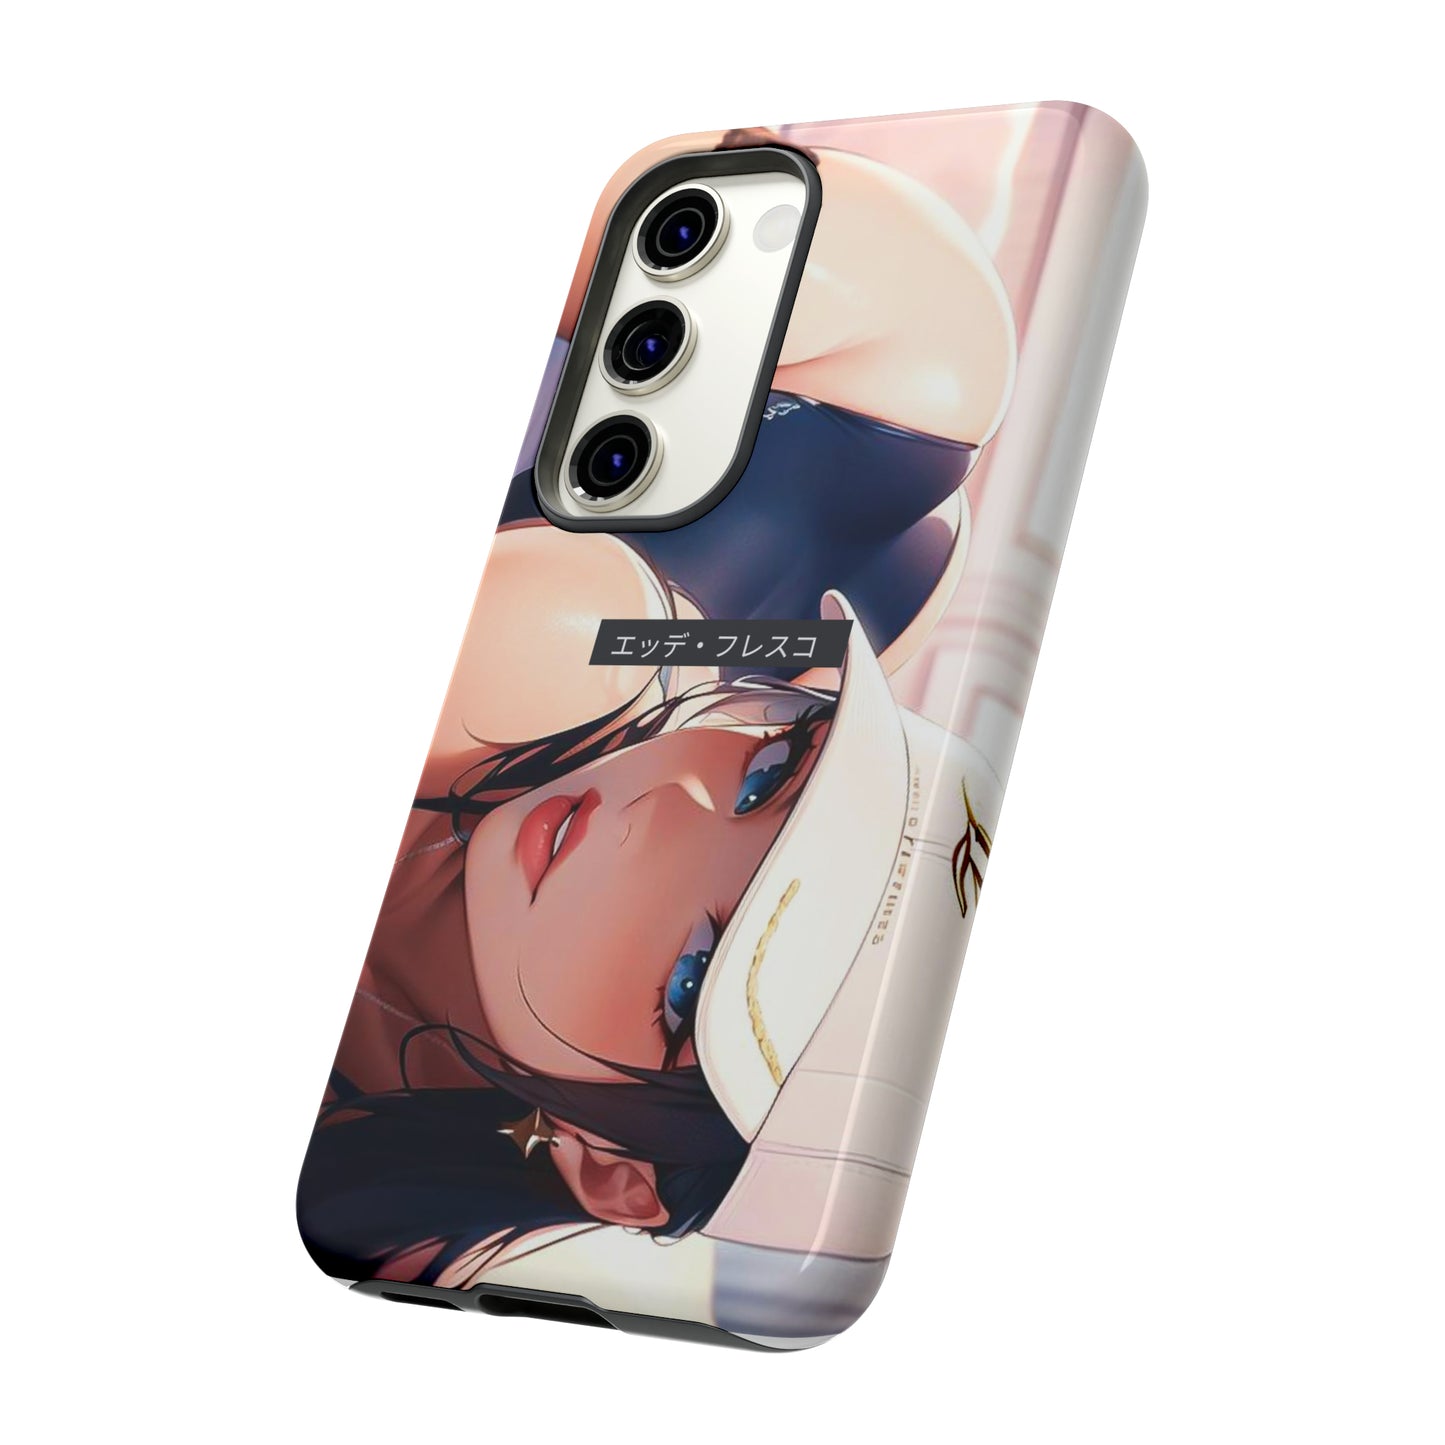 Anime Style Art Tough Cases- "She's too Kind"